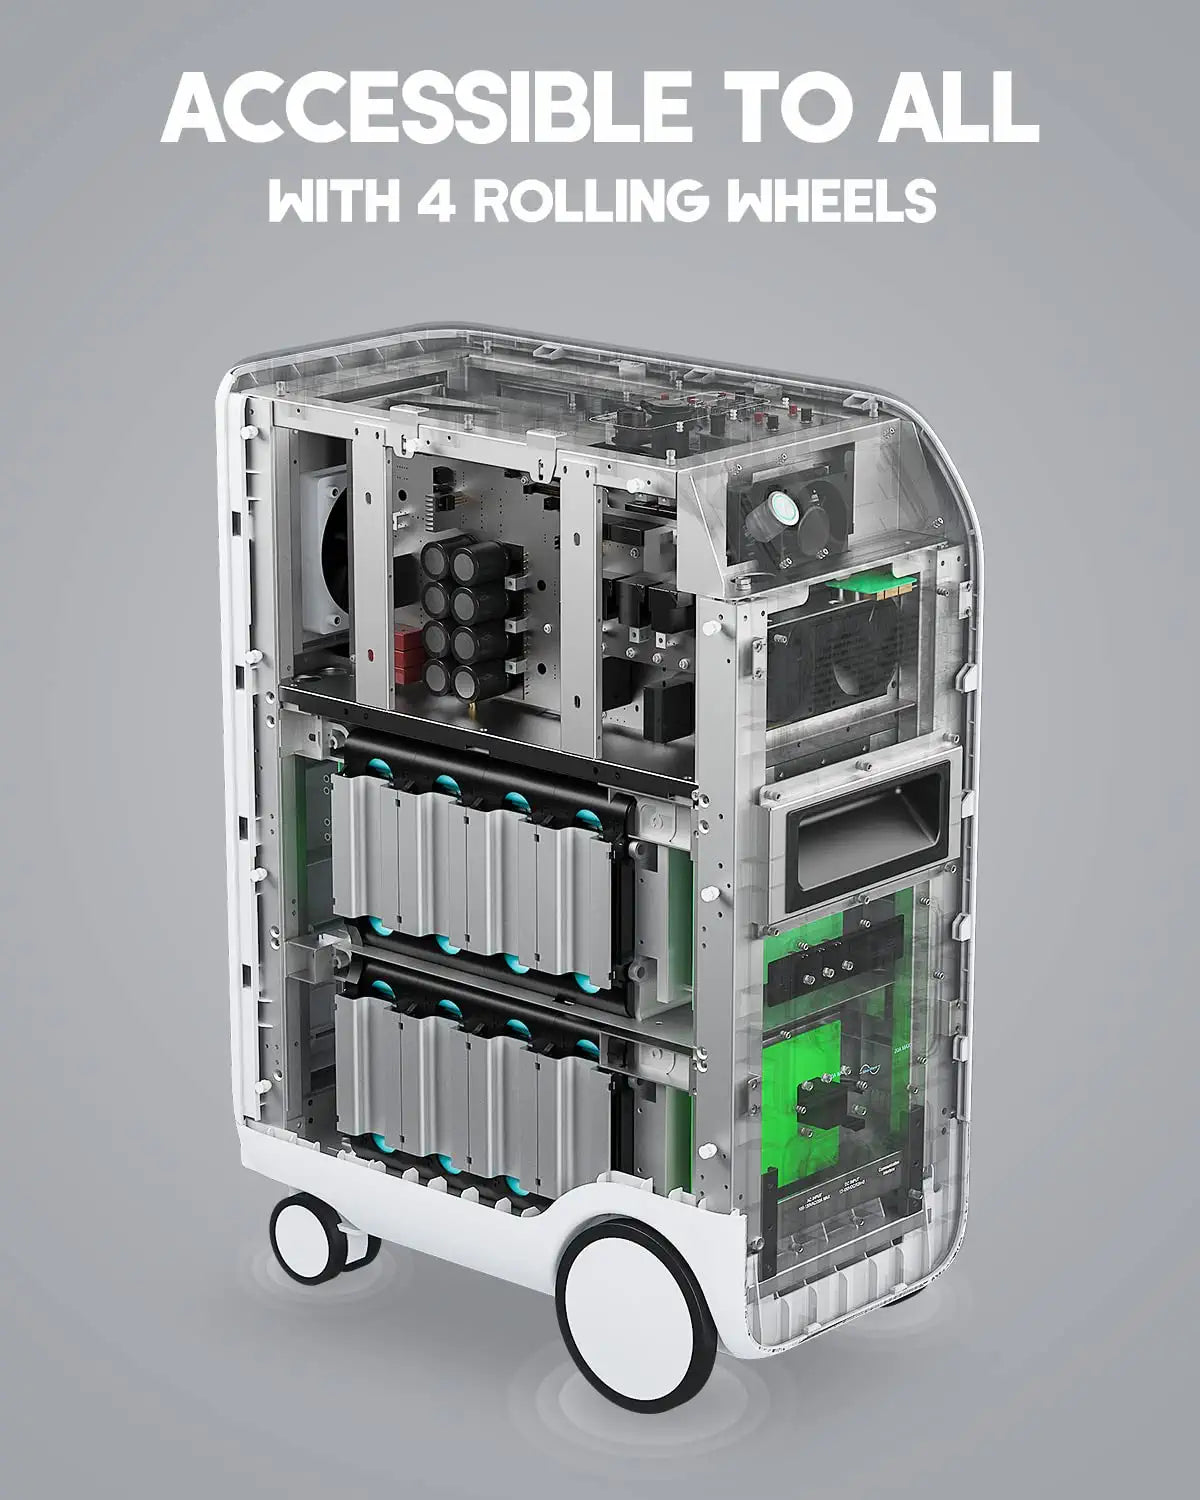 ACCESSIBLE TO ALL WIth 4 ROLLING WH